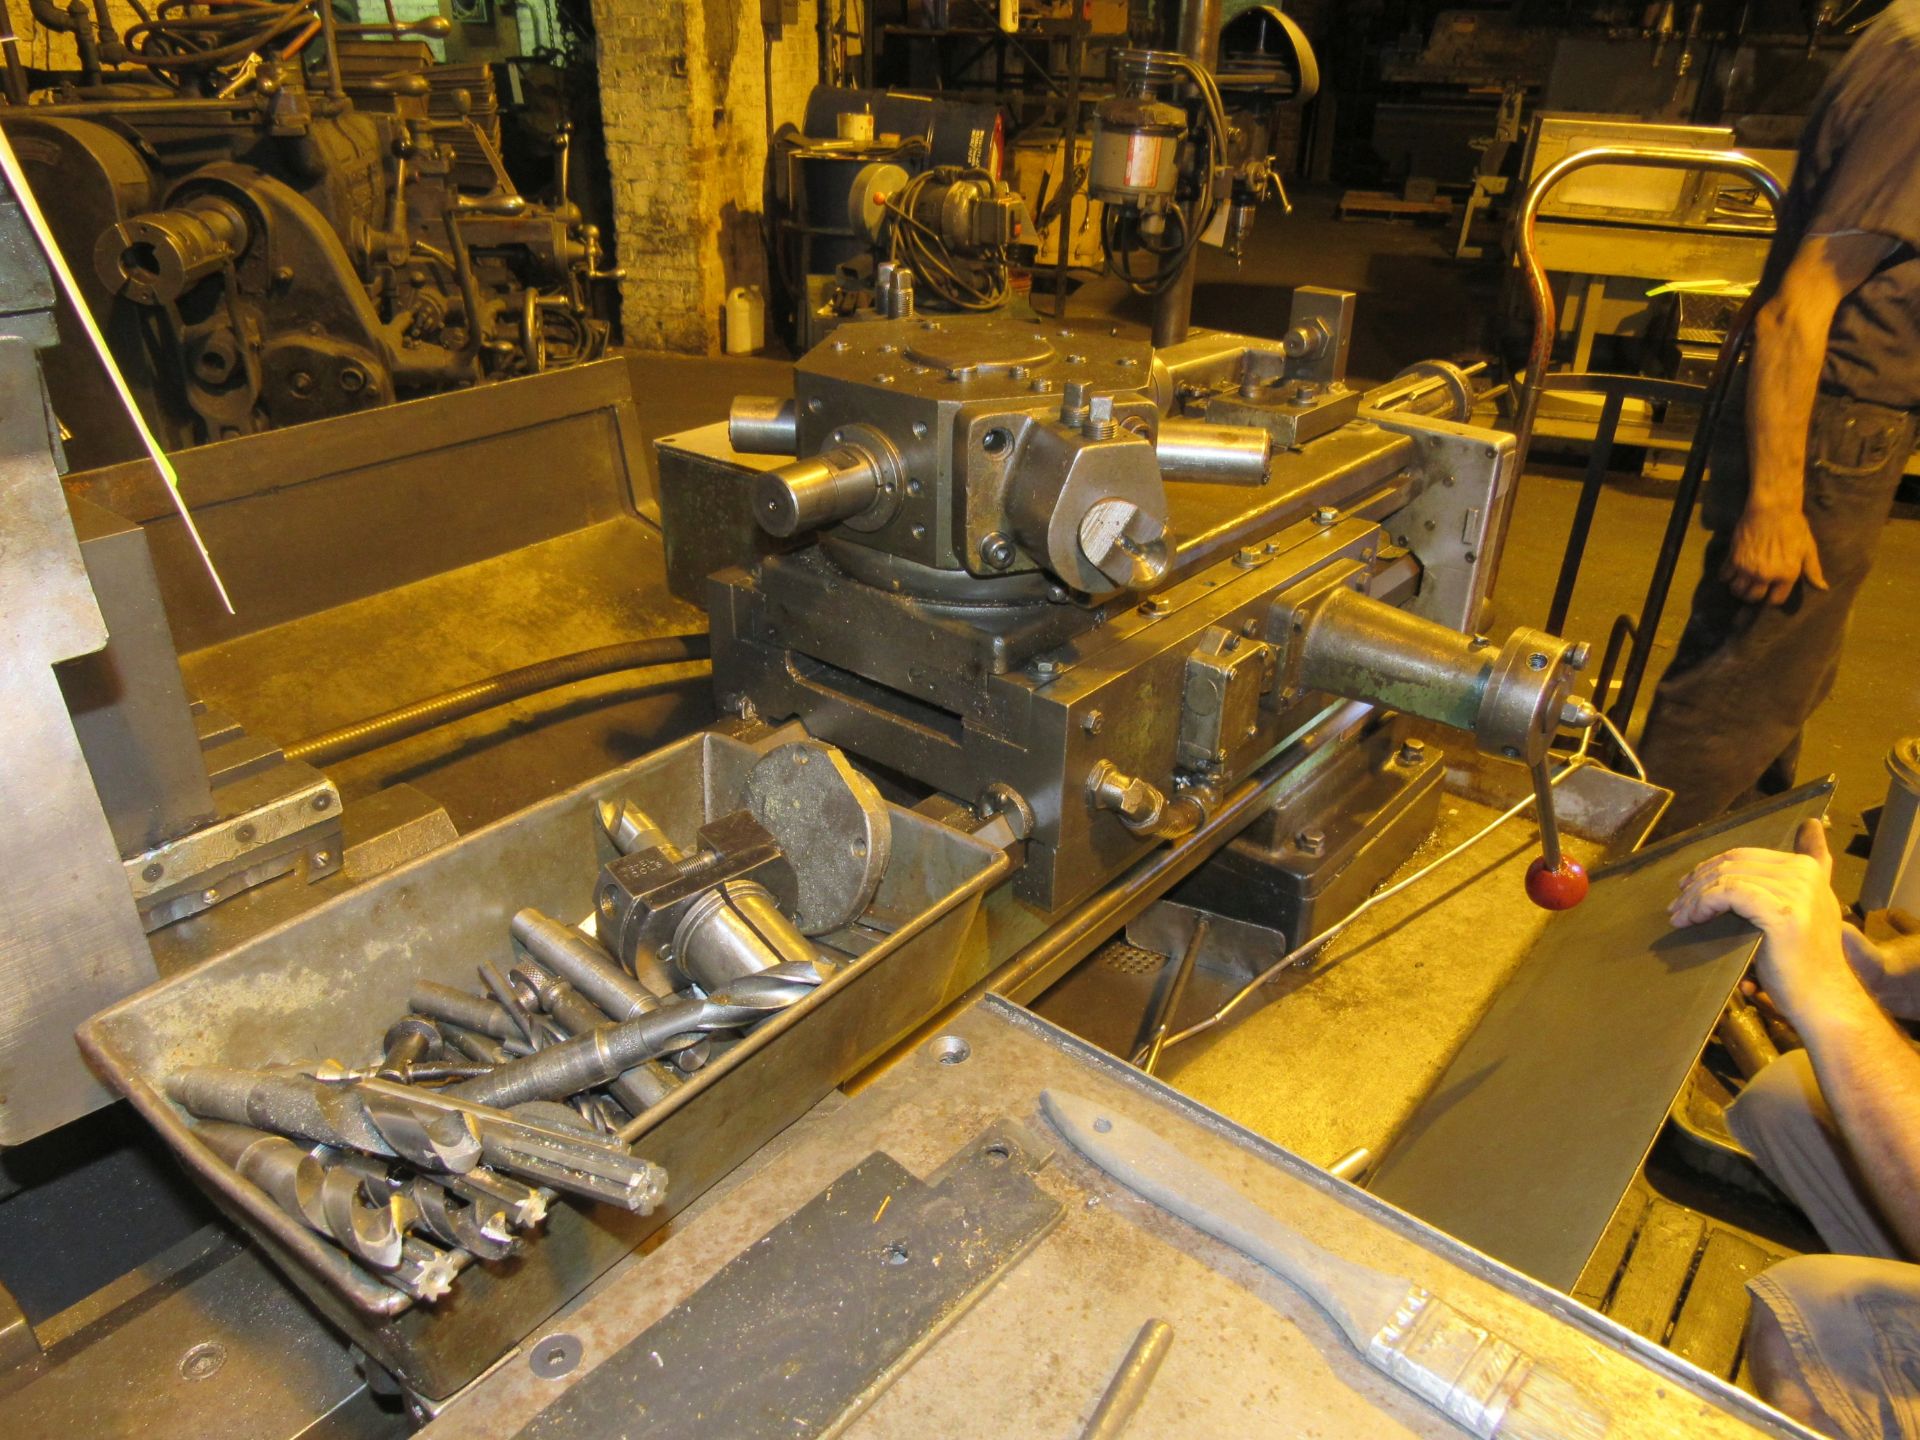 Logan model 450 collet lathe, 15" swing, 4' bed, tool post, tool turret, collet closing chuck - Image 7 of 7